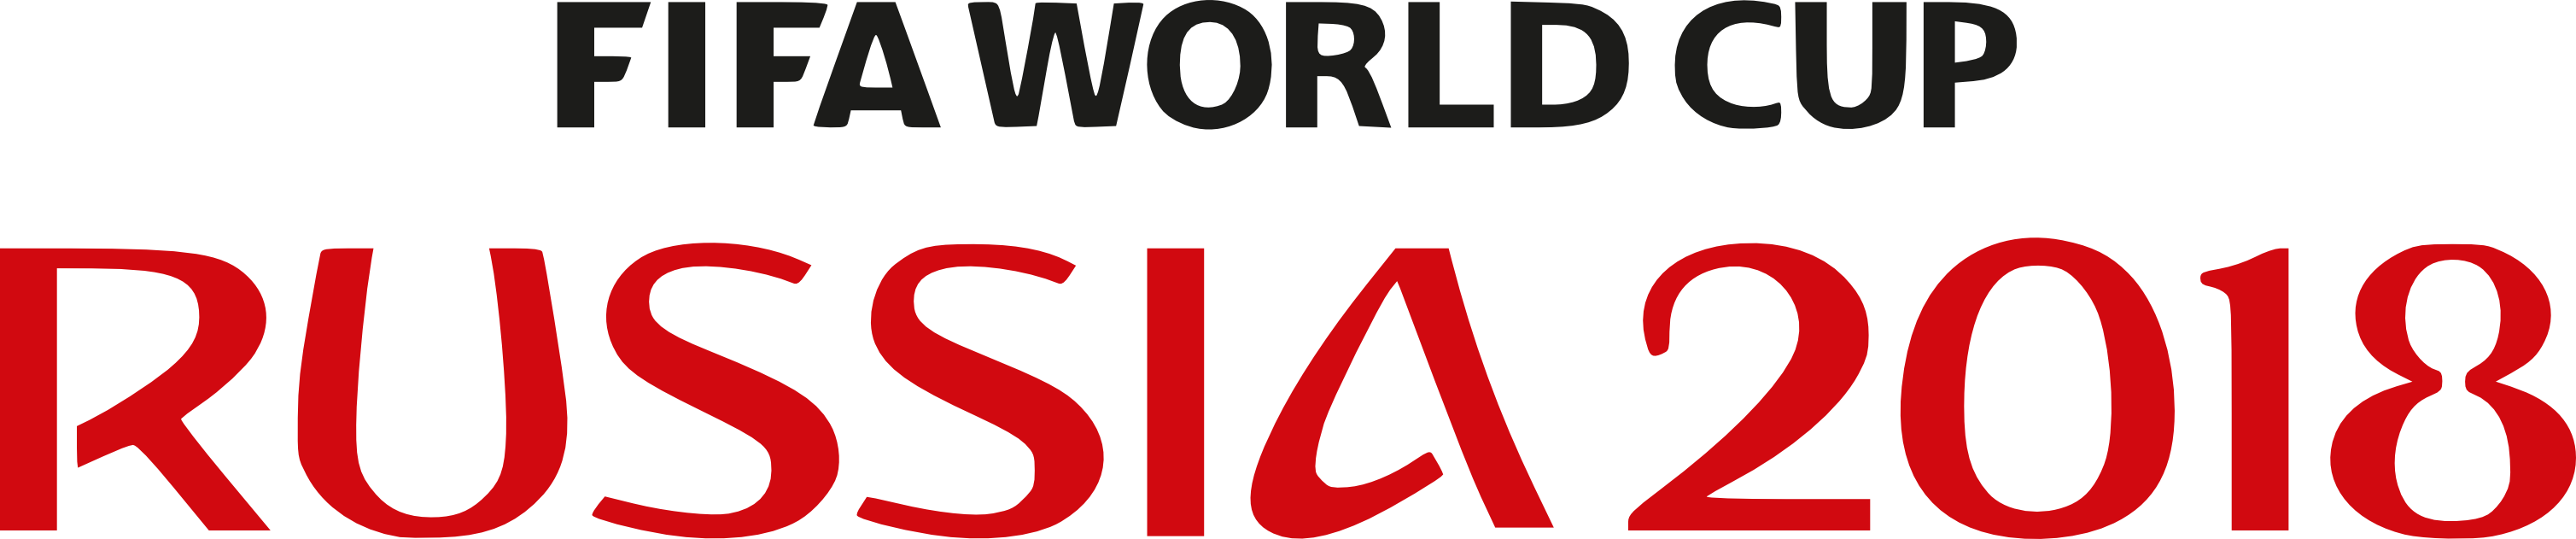 Fifa World Cup Russia 2018 Logo PNG Image